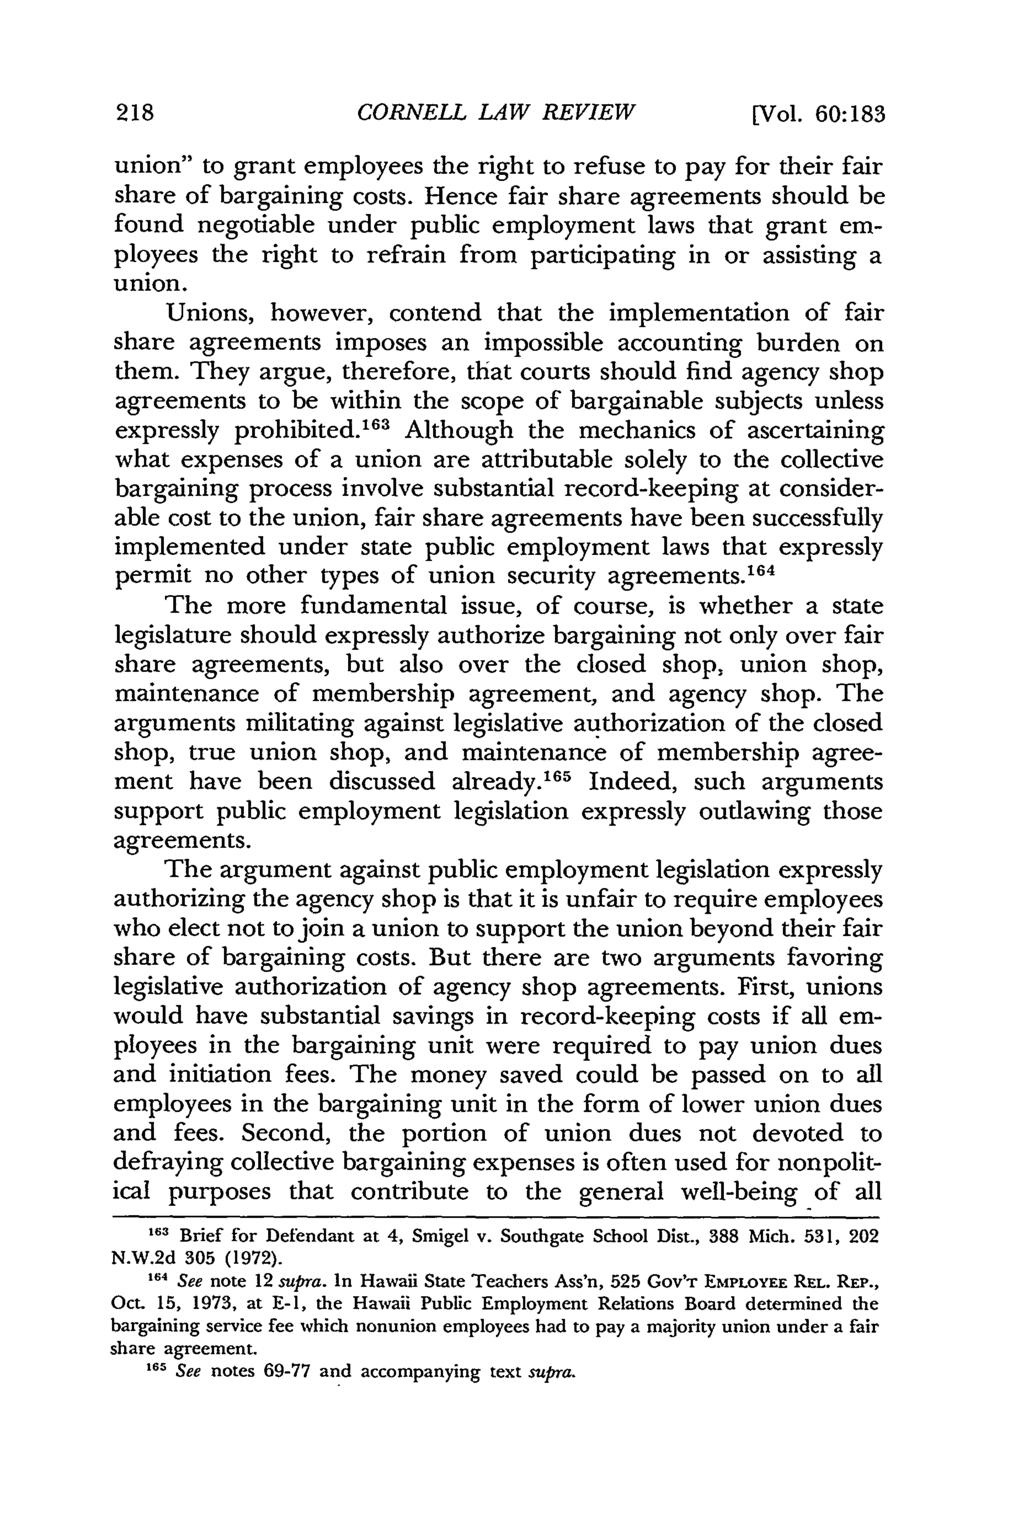 CORNELL LAW REVIEW [Vol. 60:183 union" to grant employees the right to refuse to pay for their fair share of bargaining costs.